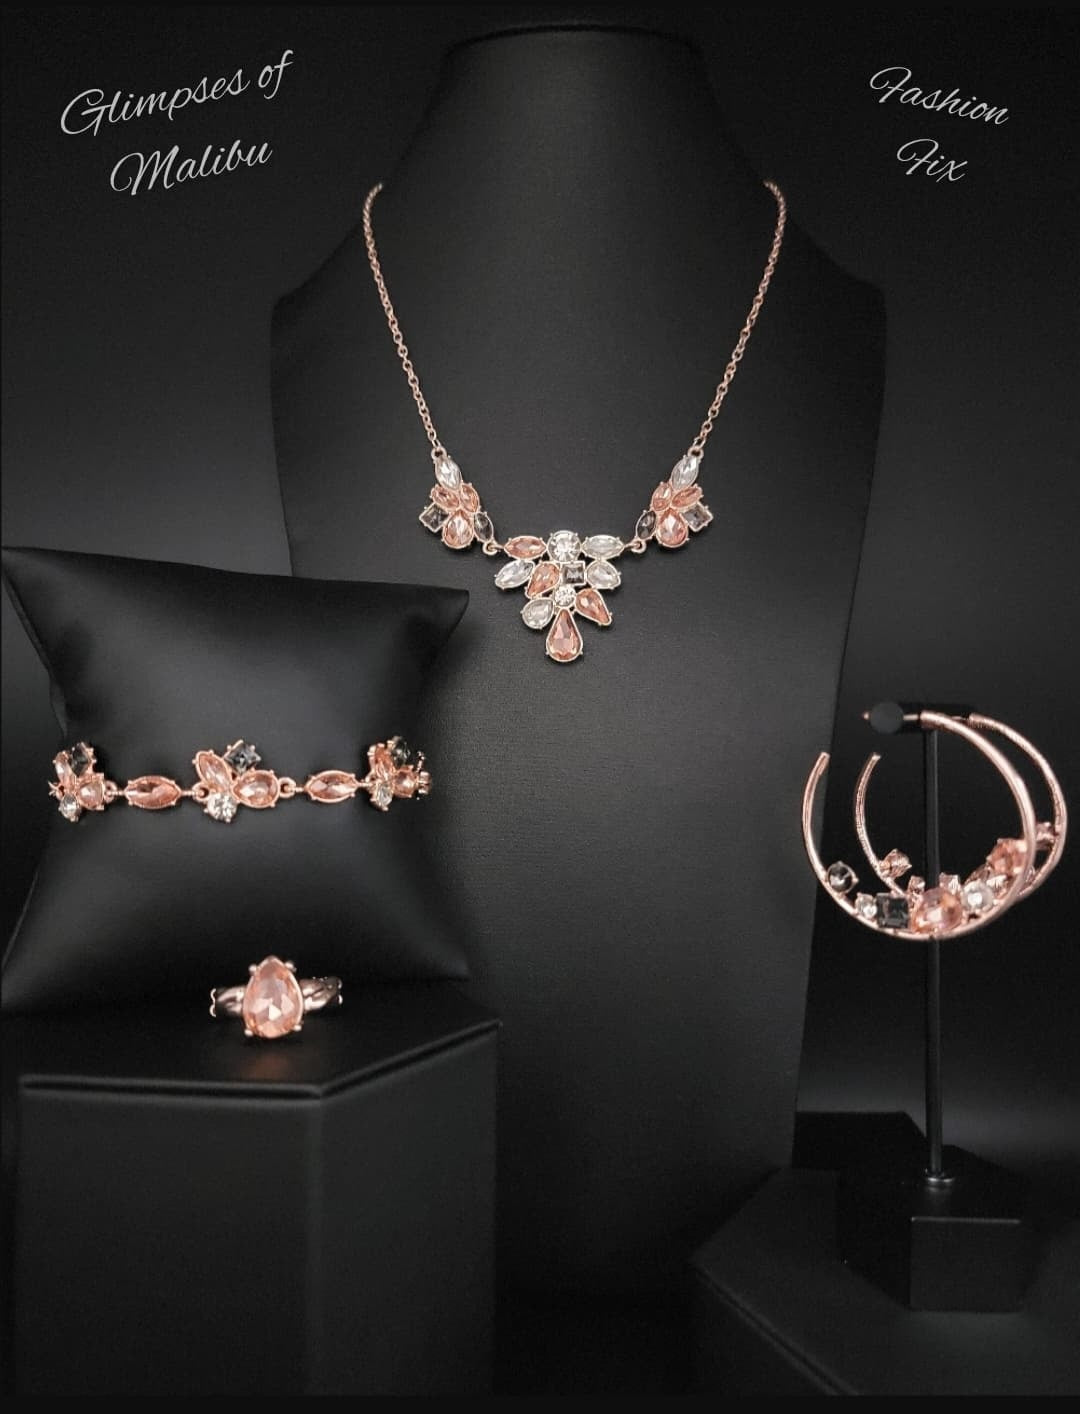 Glimpses of Malibu - 4 Piece Rose Gold Trend Blend Jewelry Set - Paparazzi Accessories - Includes one of each accessory in the Glimpses of Malibu Trend Blend in April's Fashion Fix: Completely Captivated Necklace, Attractive Allure Earrings, Colorful Captivation Bracelet, Law of Attraction Fashion Ring.  Featuring playful styles accented with fun pops of color, the Glimpses of Malibu Collection is an endearing assortment of cheerful and whimsical laid-back fashion.